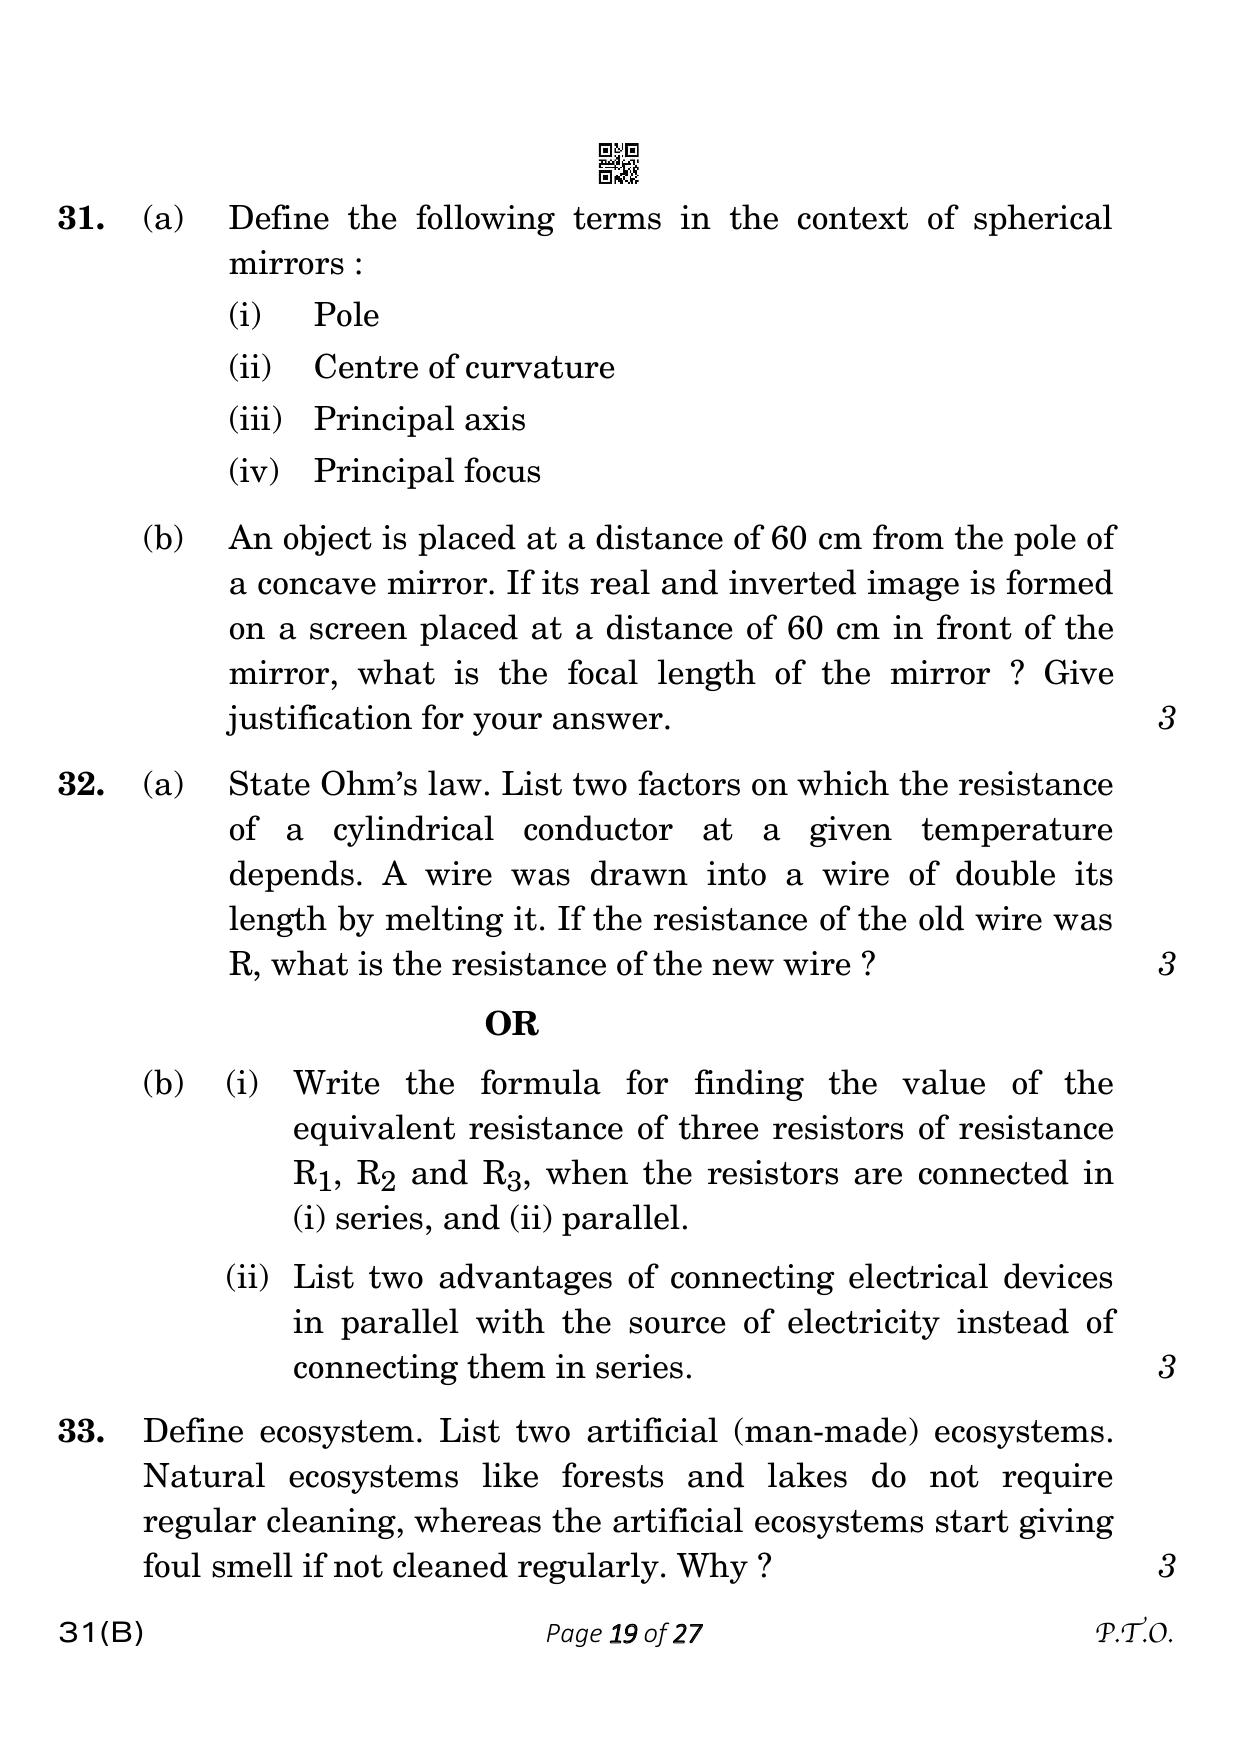 CBSE Class 10 31-B Science 2023 (Compartment) Question Paper - Page 19